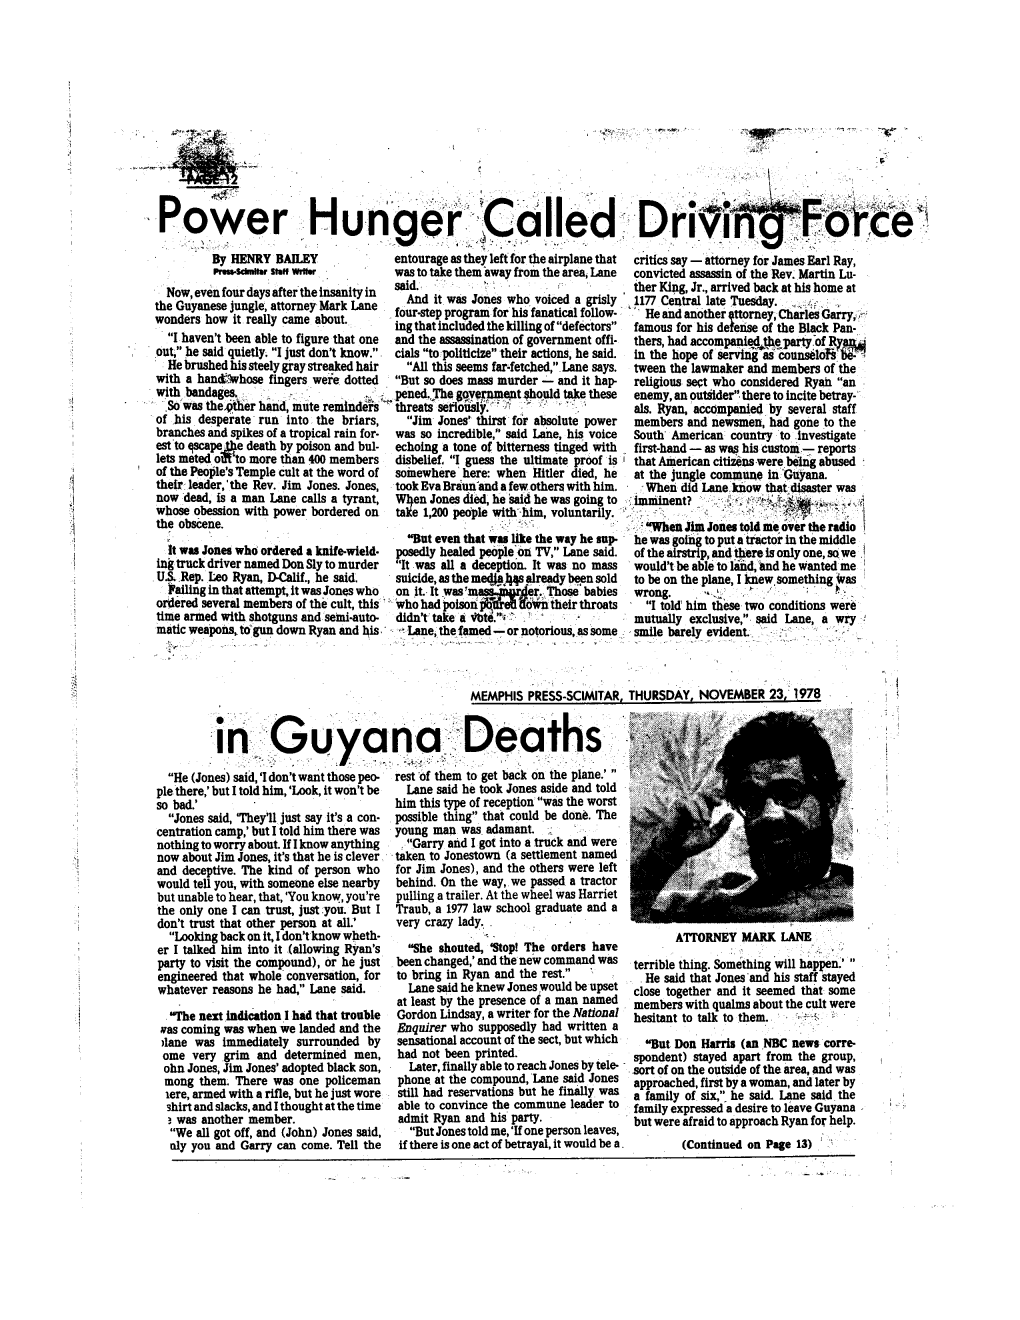 Power Hungercalled Drivin Nguyana Deaths